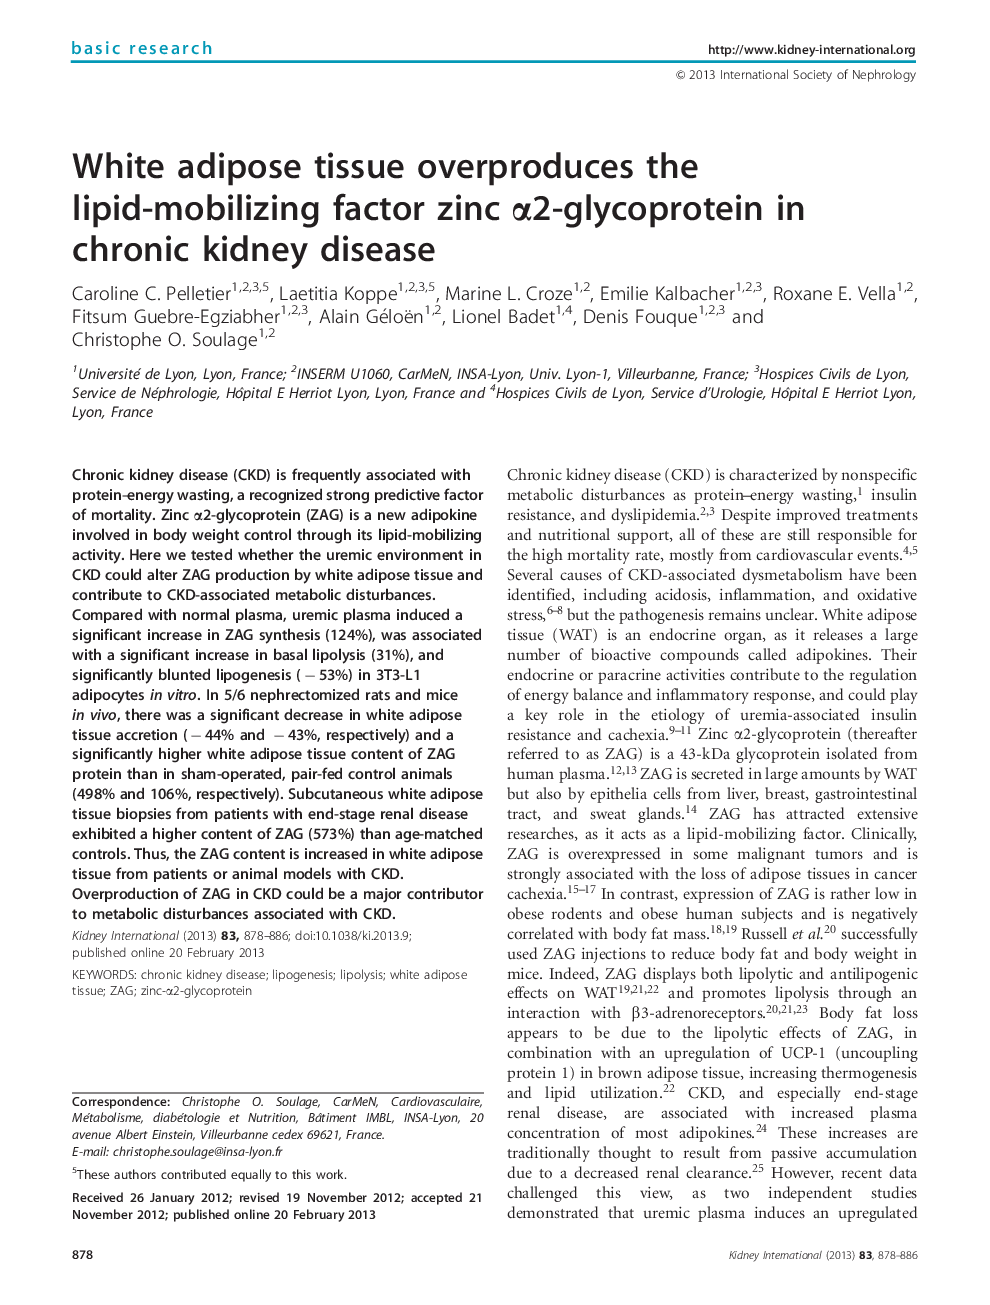 White adipose tissue overproduces the lipid-mobilizing factor zinc α2-glycoprotein in chronic kidney disease 